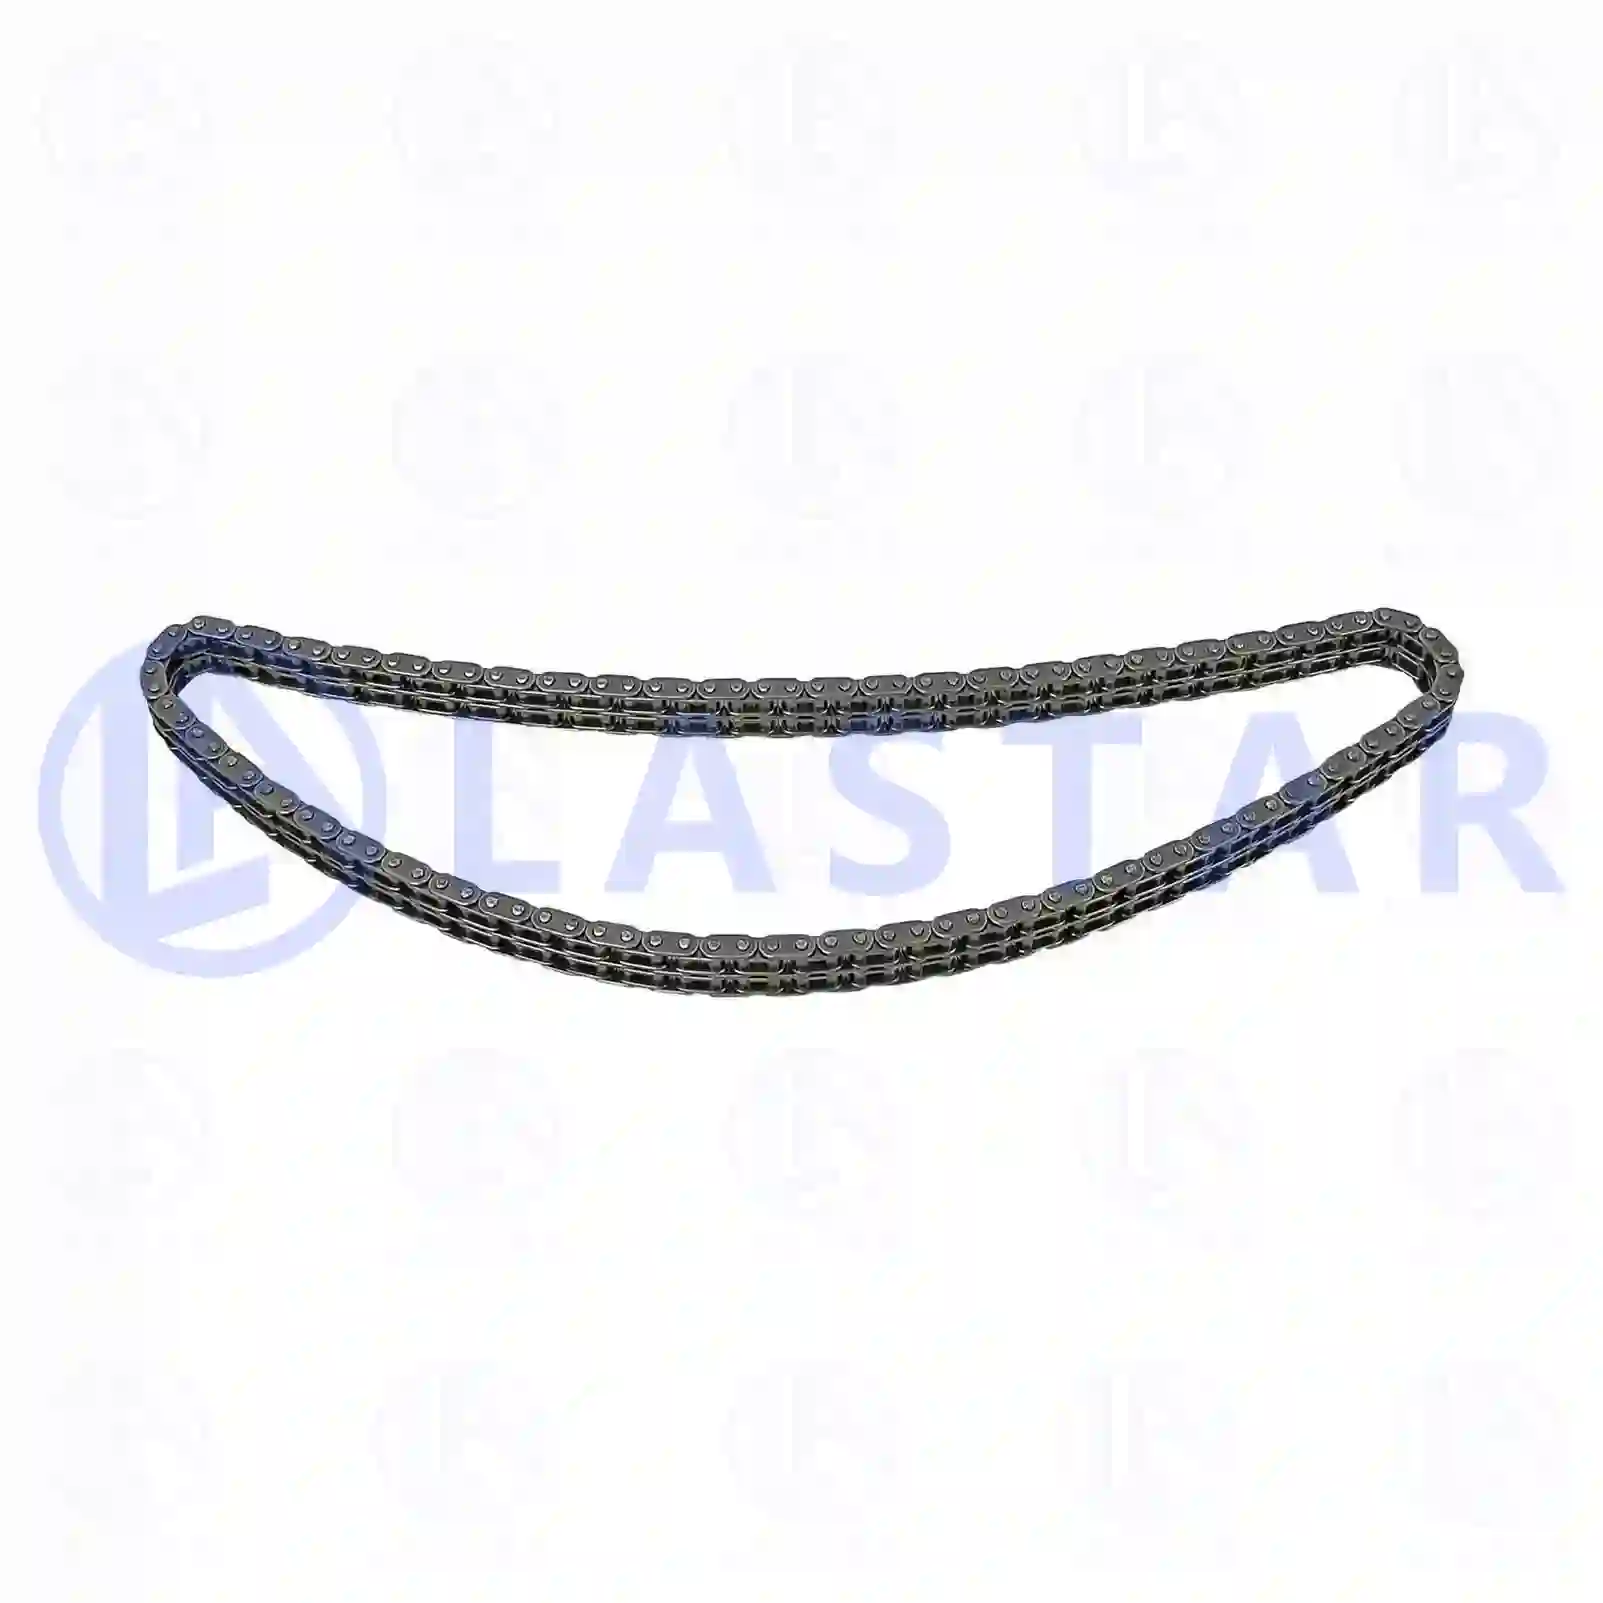 Timing chain, 77702155, 5080209AA, 5080209AA, 0009933576, 0039977094, 0039977594 ||  77702155 Lastar Spare Part | Truck Spare Parts, Auotomotive Spare Parts Timing chain, 77702155, 5080209AA, 5080209AA, 0009933576, 0039977094, 0039977594 ||  77702155 Lastar Spare Part | Truck Spare Parts, Auotomotive Spare Parts